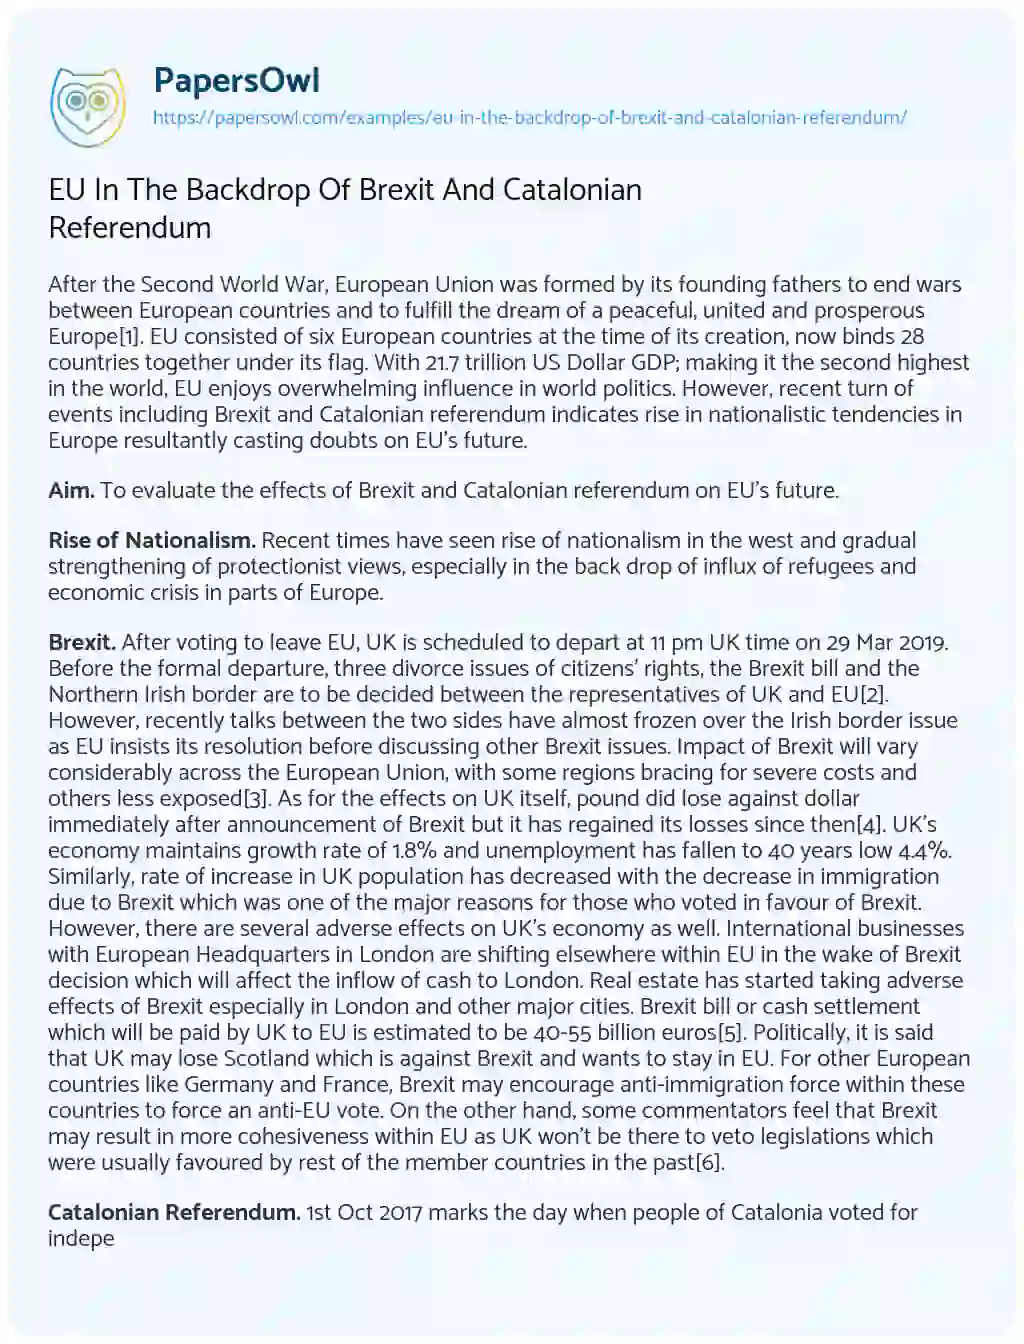 Essay on EU in the Backdrop of Brexit and Catalonian Referendum